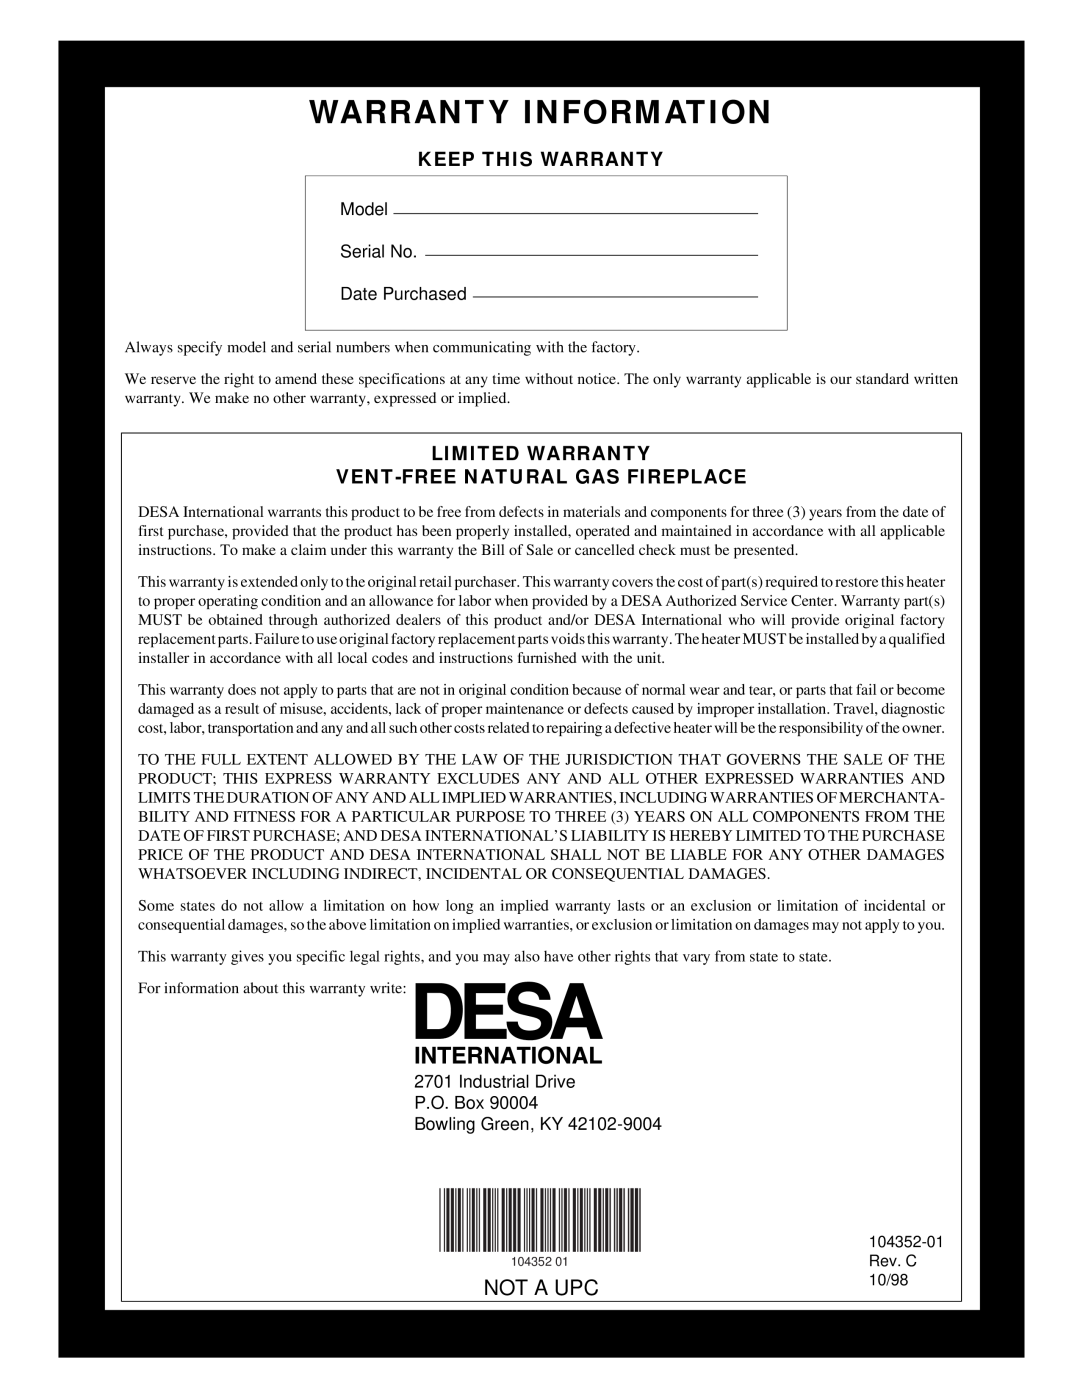 Desa VYGF33NR Warranty Information, Not A Upc, Model Serial No Date Purchased, Industrial Drive P.O. Box Bowling Green, KY 